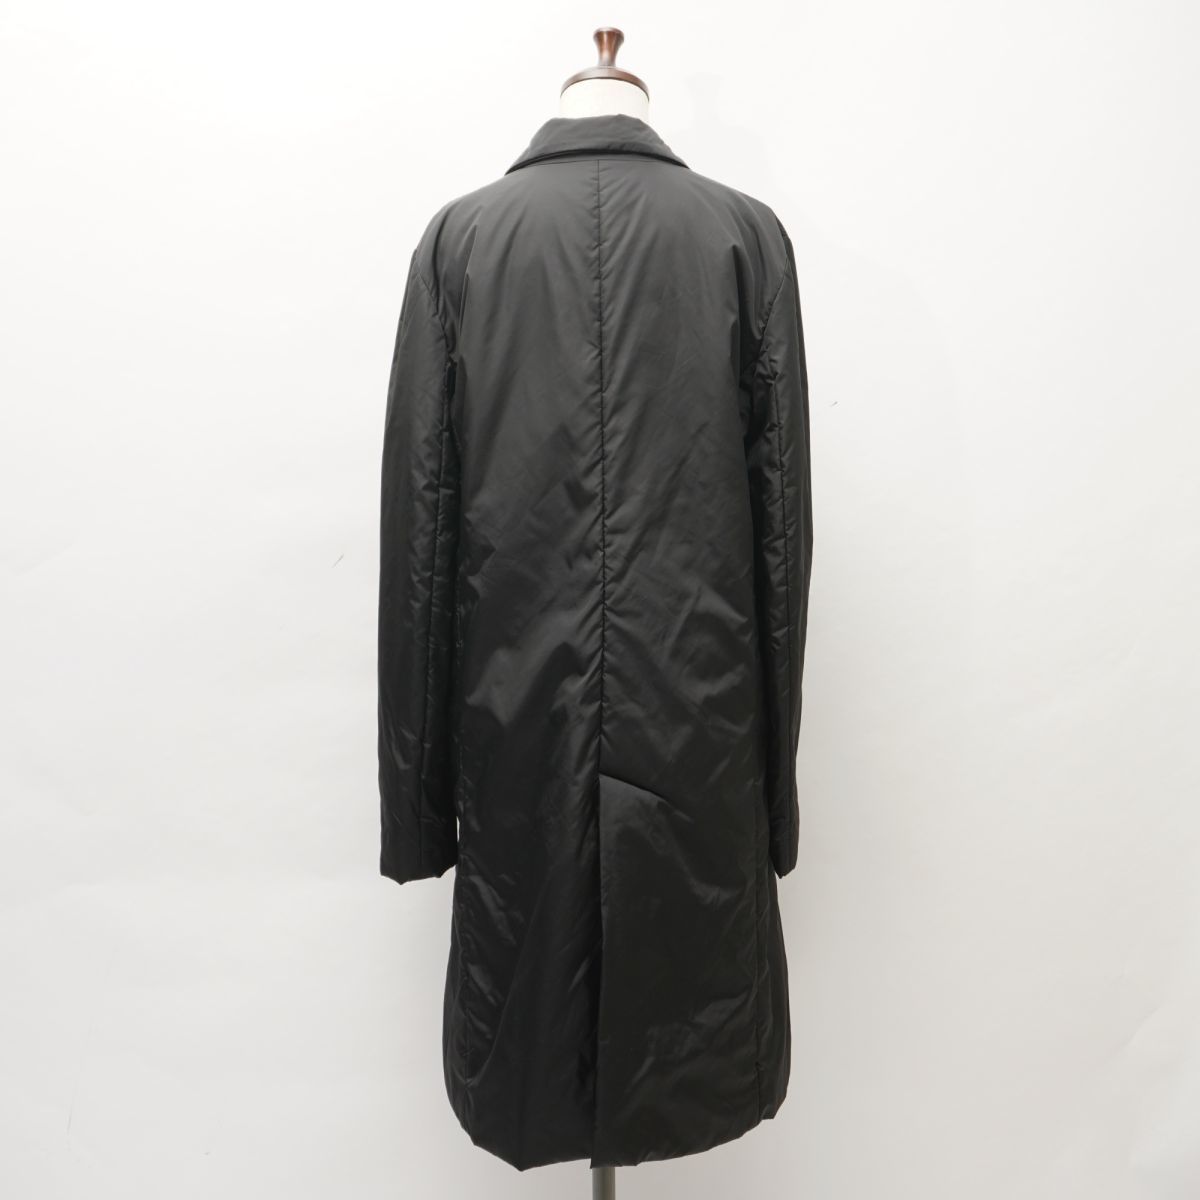  beautiful goods Theory theory tailored cotton inside nylon long coat lady's autumn winter outer black black size 4*IC132